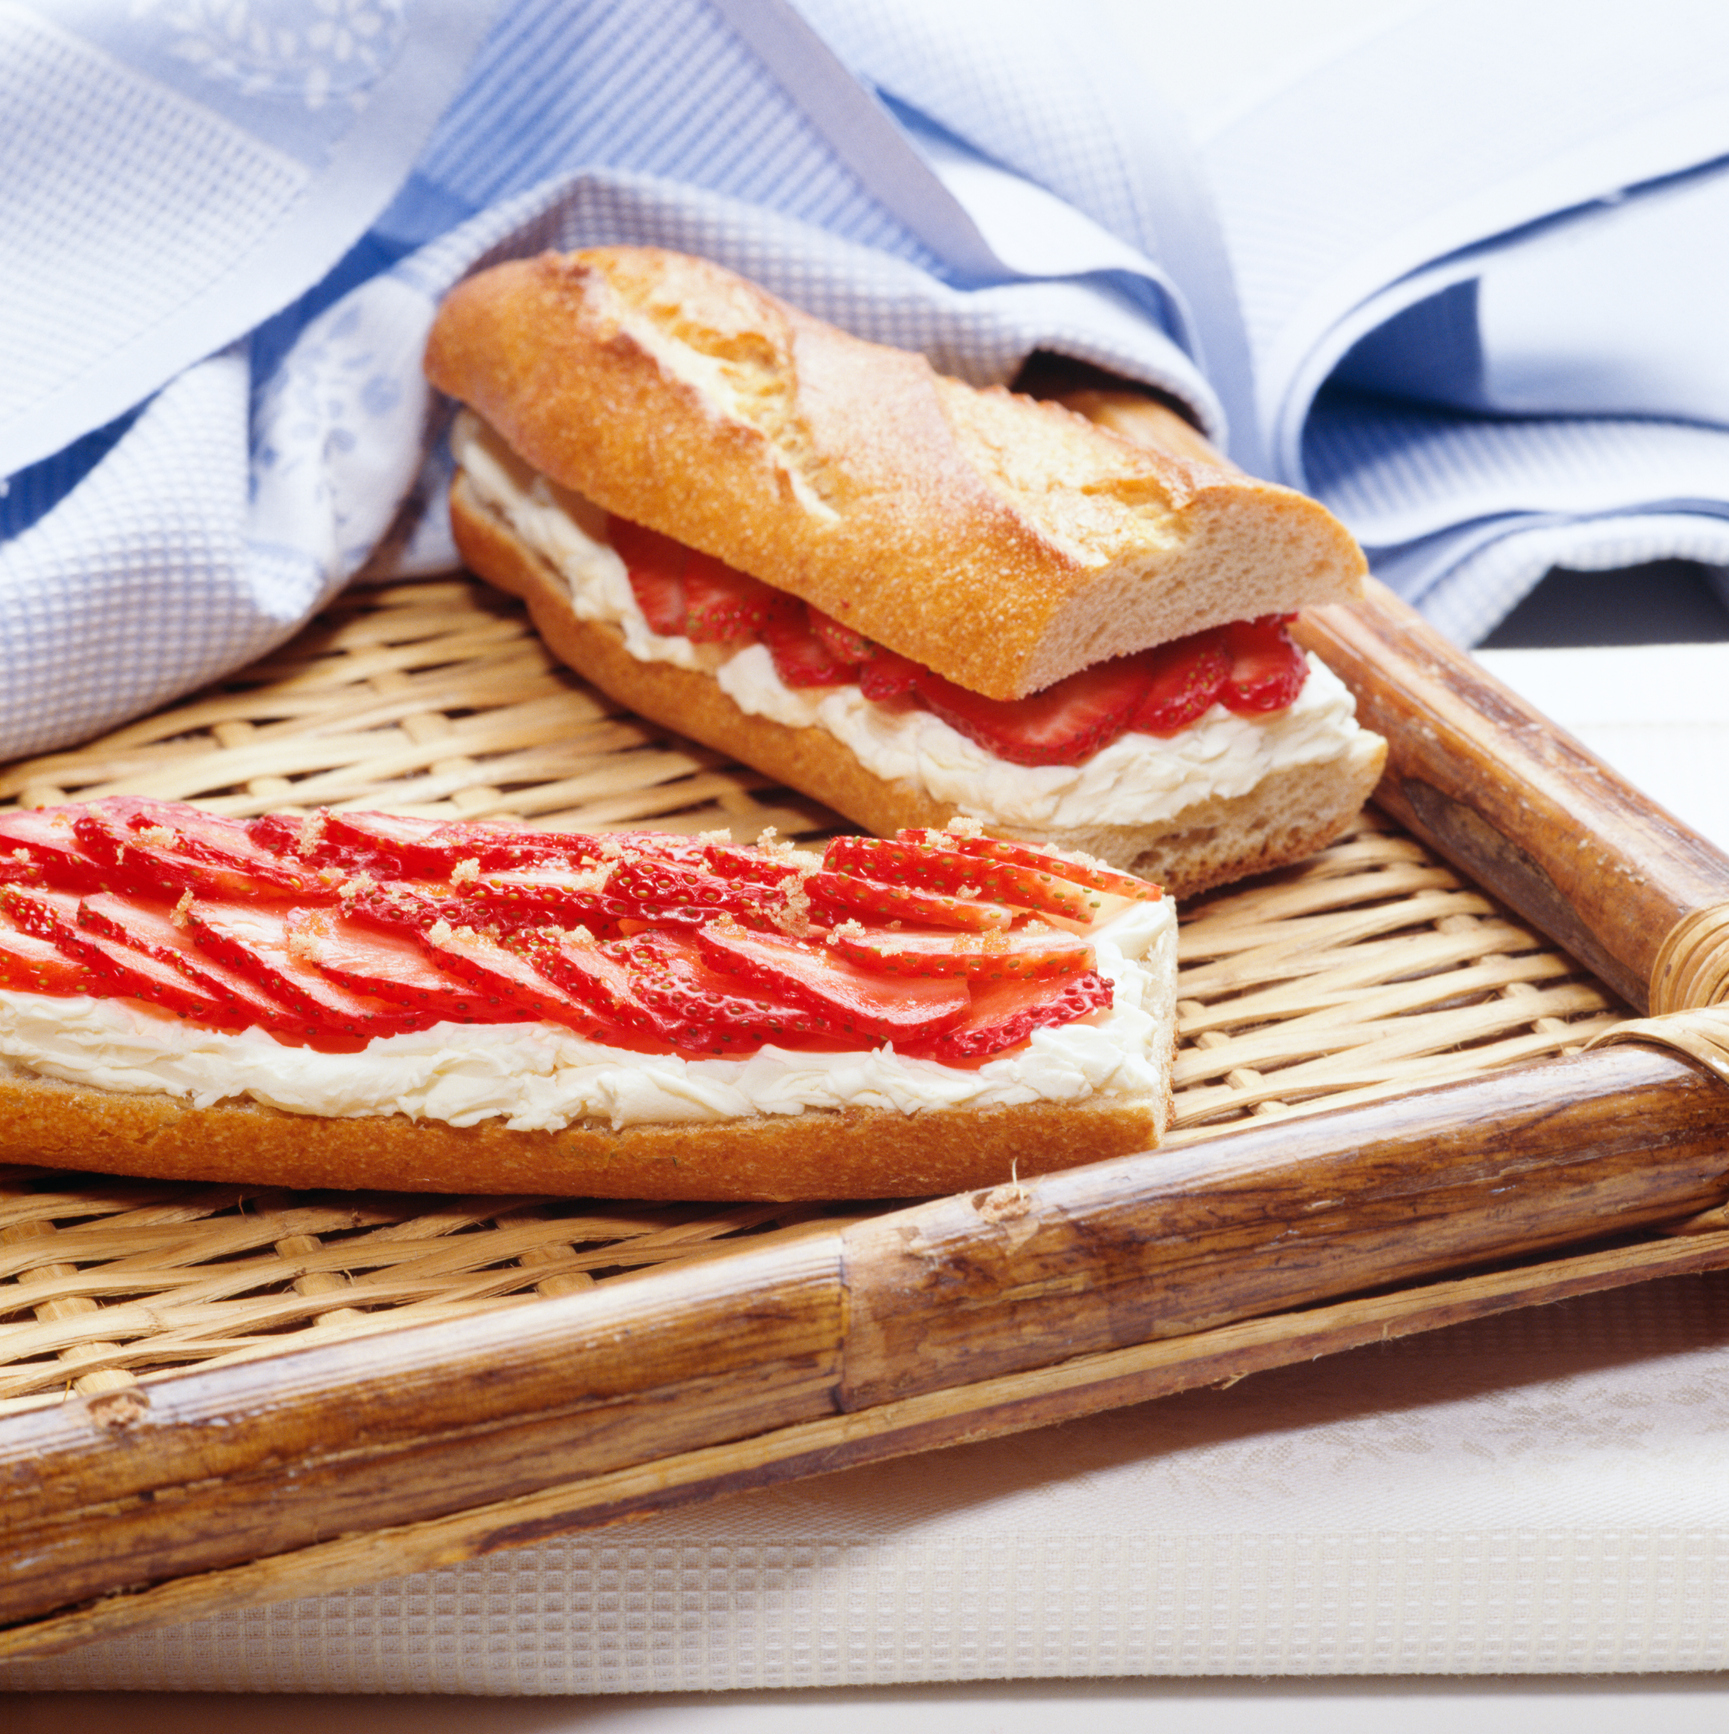 Strawberry and cream cheese Sandwich on baguette